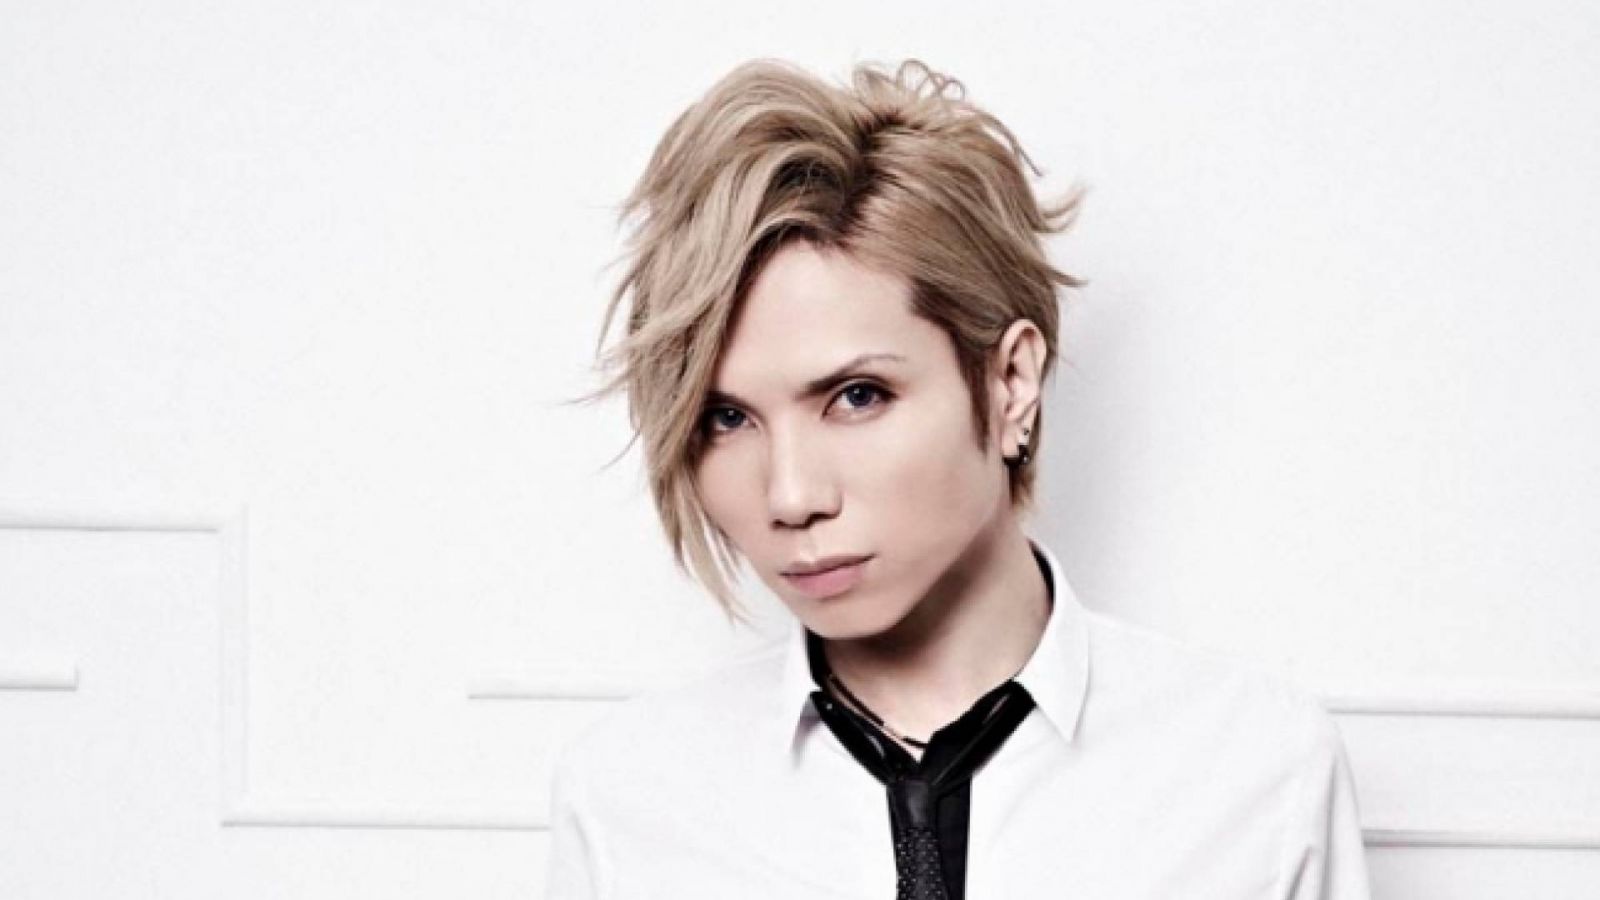 Happy New Year from acid black cherry © Avex Entertainment Inc. / Up-rise Inc.